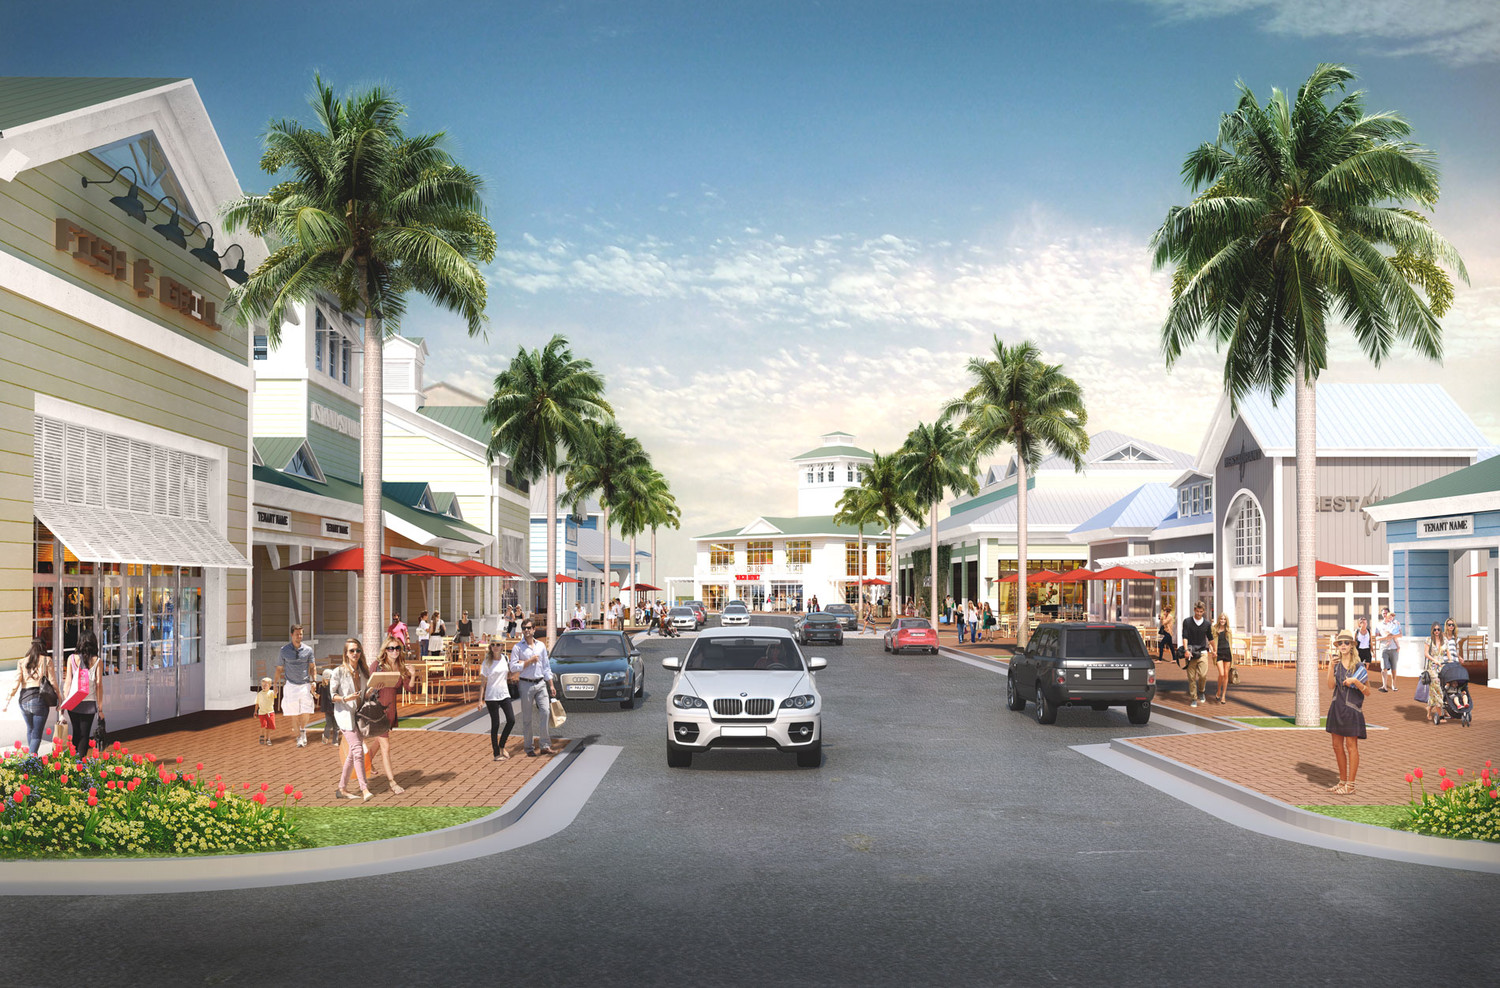 As the exclusive retail leasing brokers for the Beachwalk project, Colliers International Northeast Florida will be responsible for leasing 450,000 square feet of retail space surrounding the community’s Crystal Lagoon.